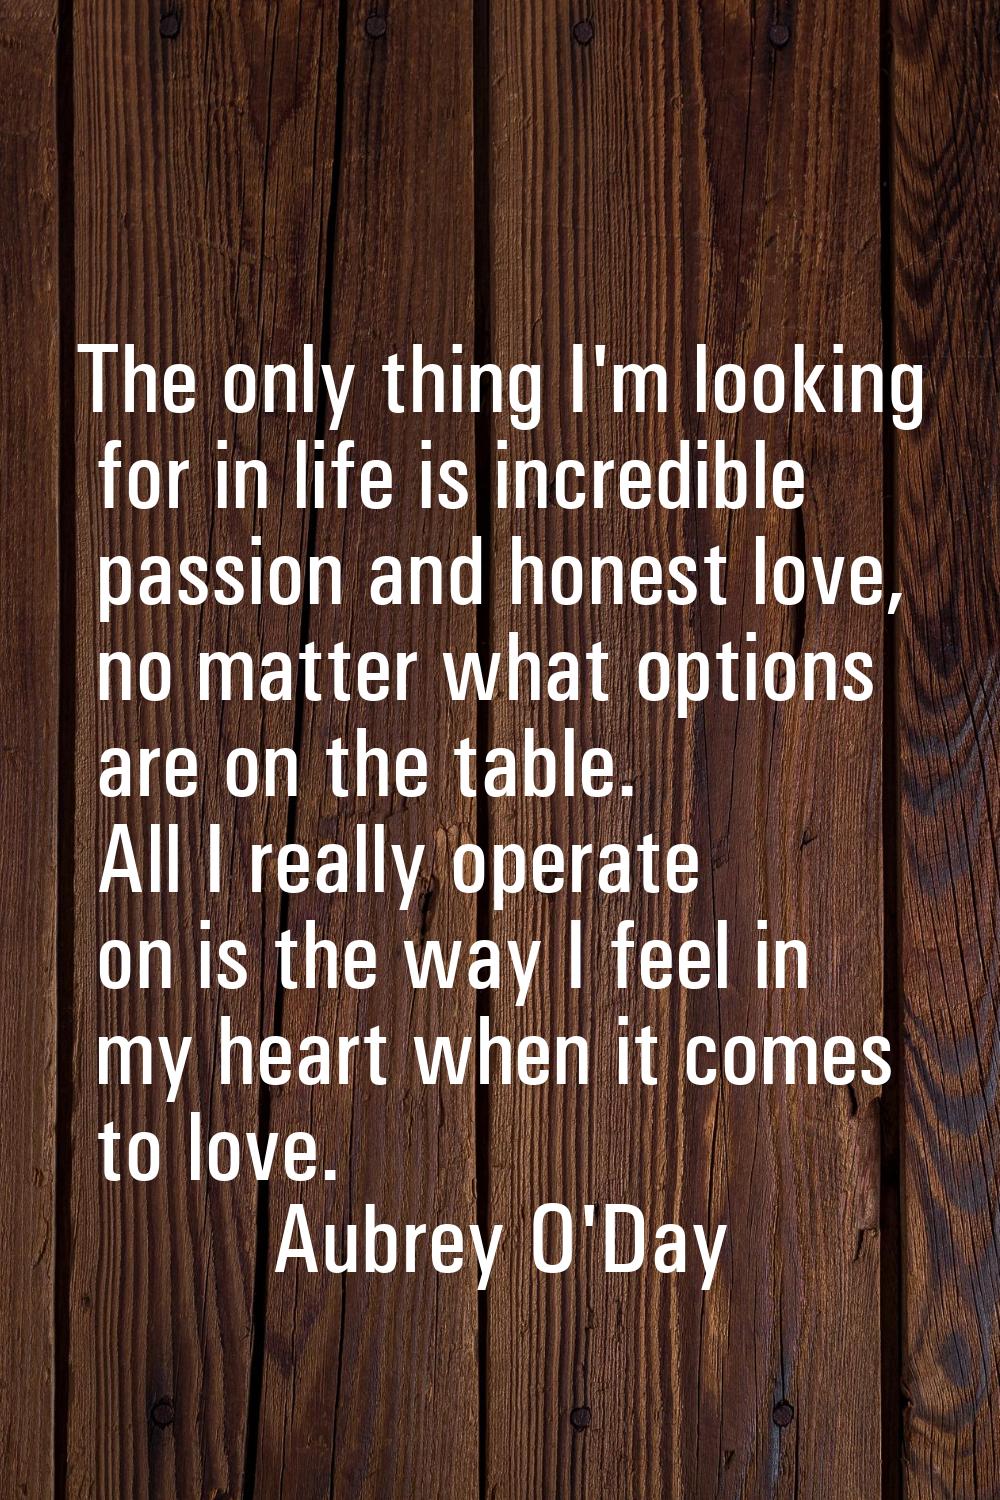 The only thing I'm looking for in life is incredible passion and honest love, no matter what option